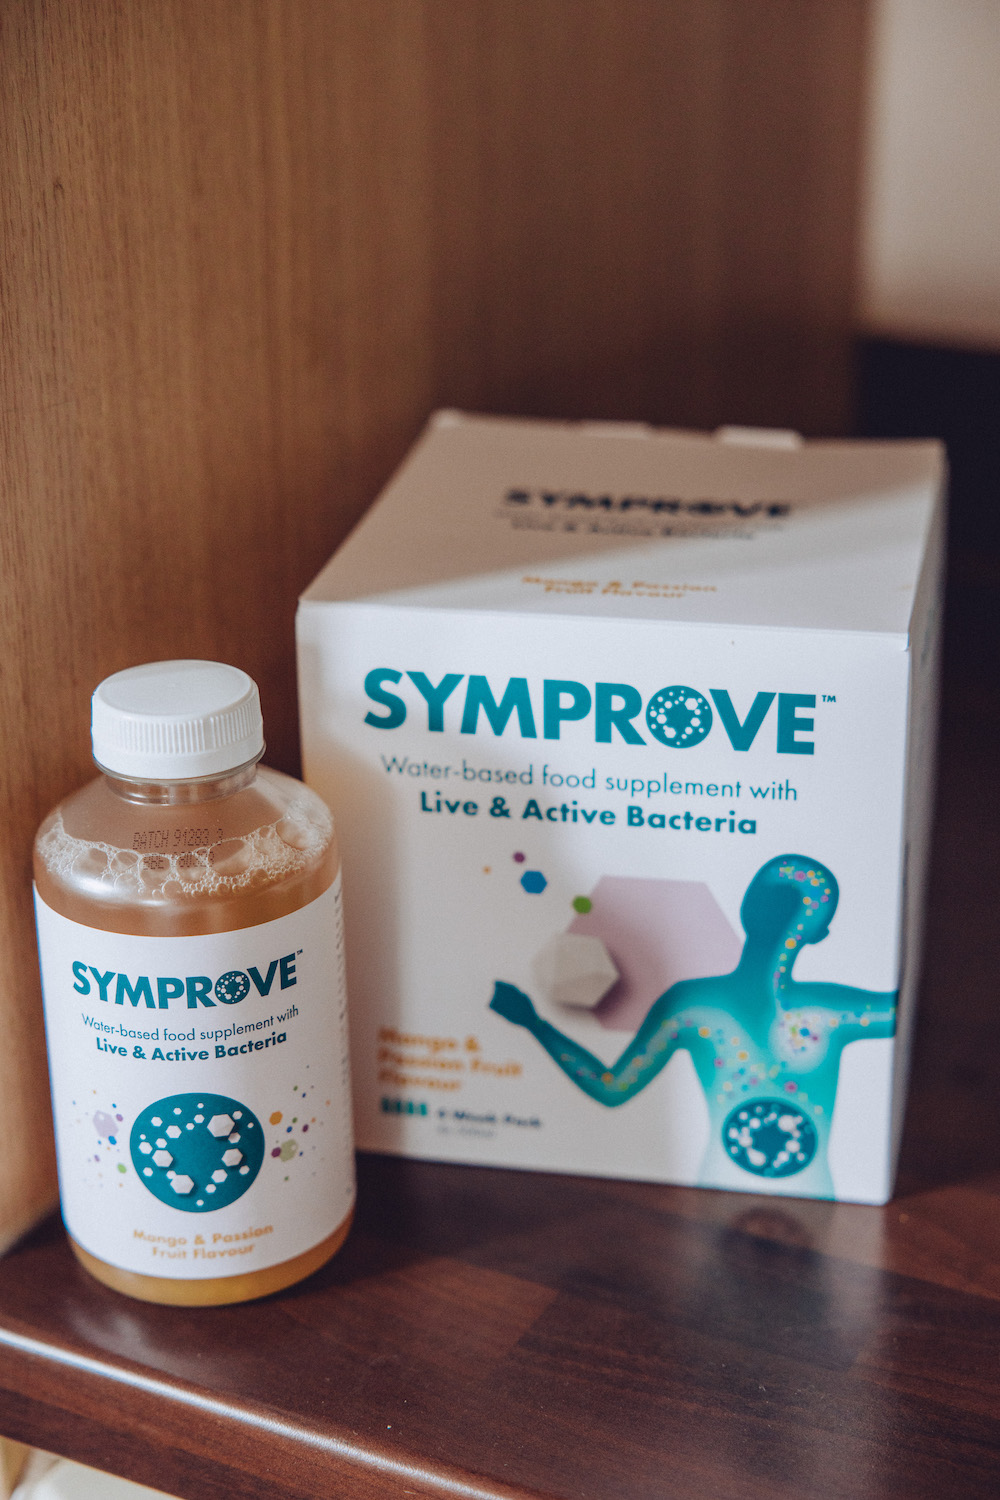 Mango and passionfruit bottle of symprove probiotics with the box behind, sat on a kitchen counter 